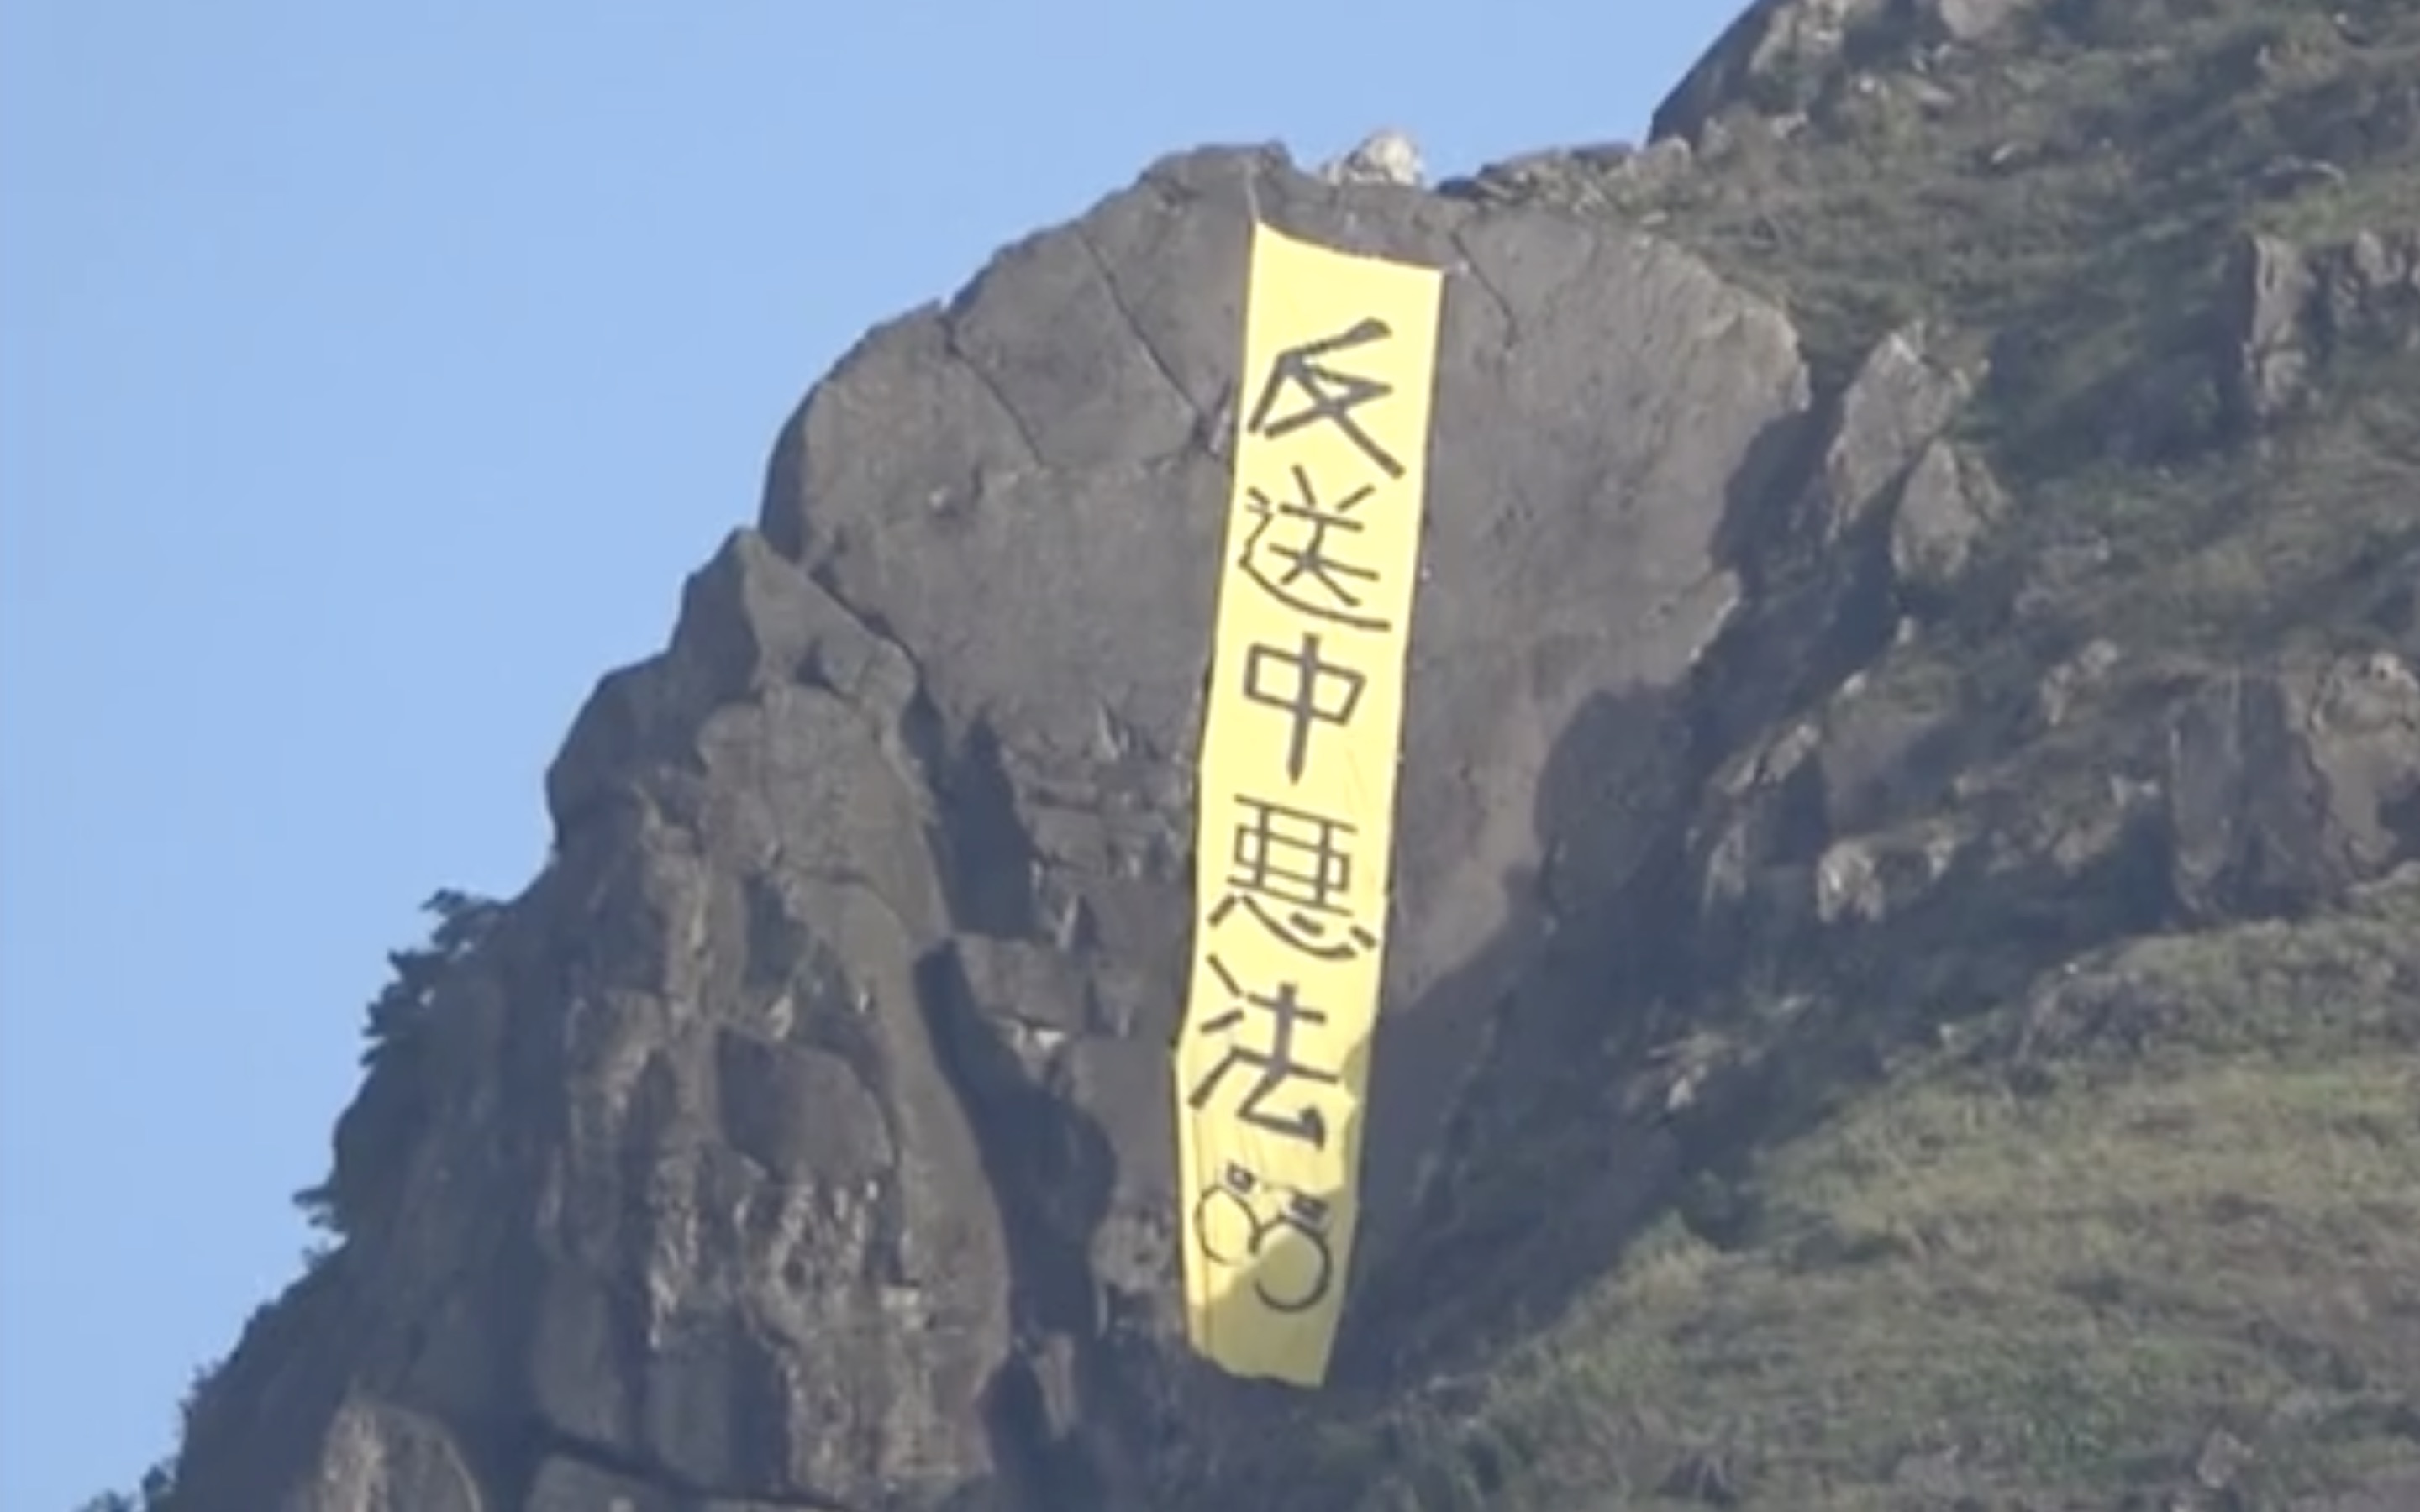 A yellow banner with the words “oppose the evil send-to-China law” was spotted hanging off the hillside of Kowloon Peak this morning. Screengrab via Apple Daily video.